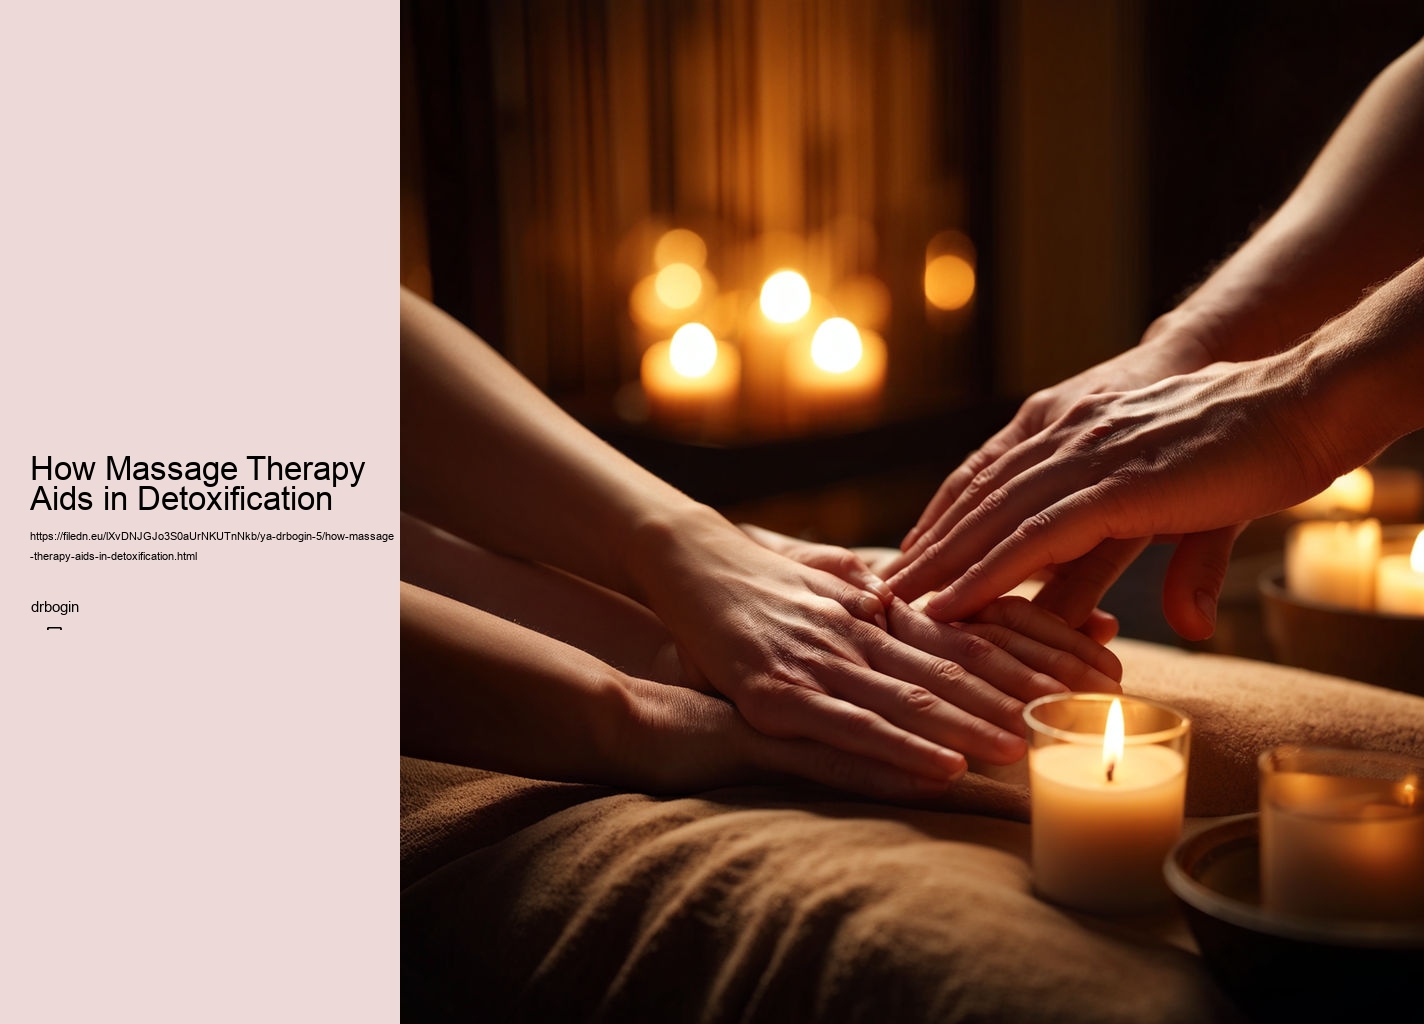 How Massage Therapy Aids in Detoxification